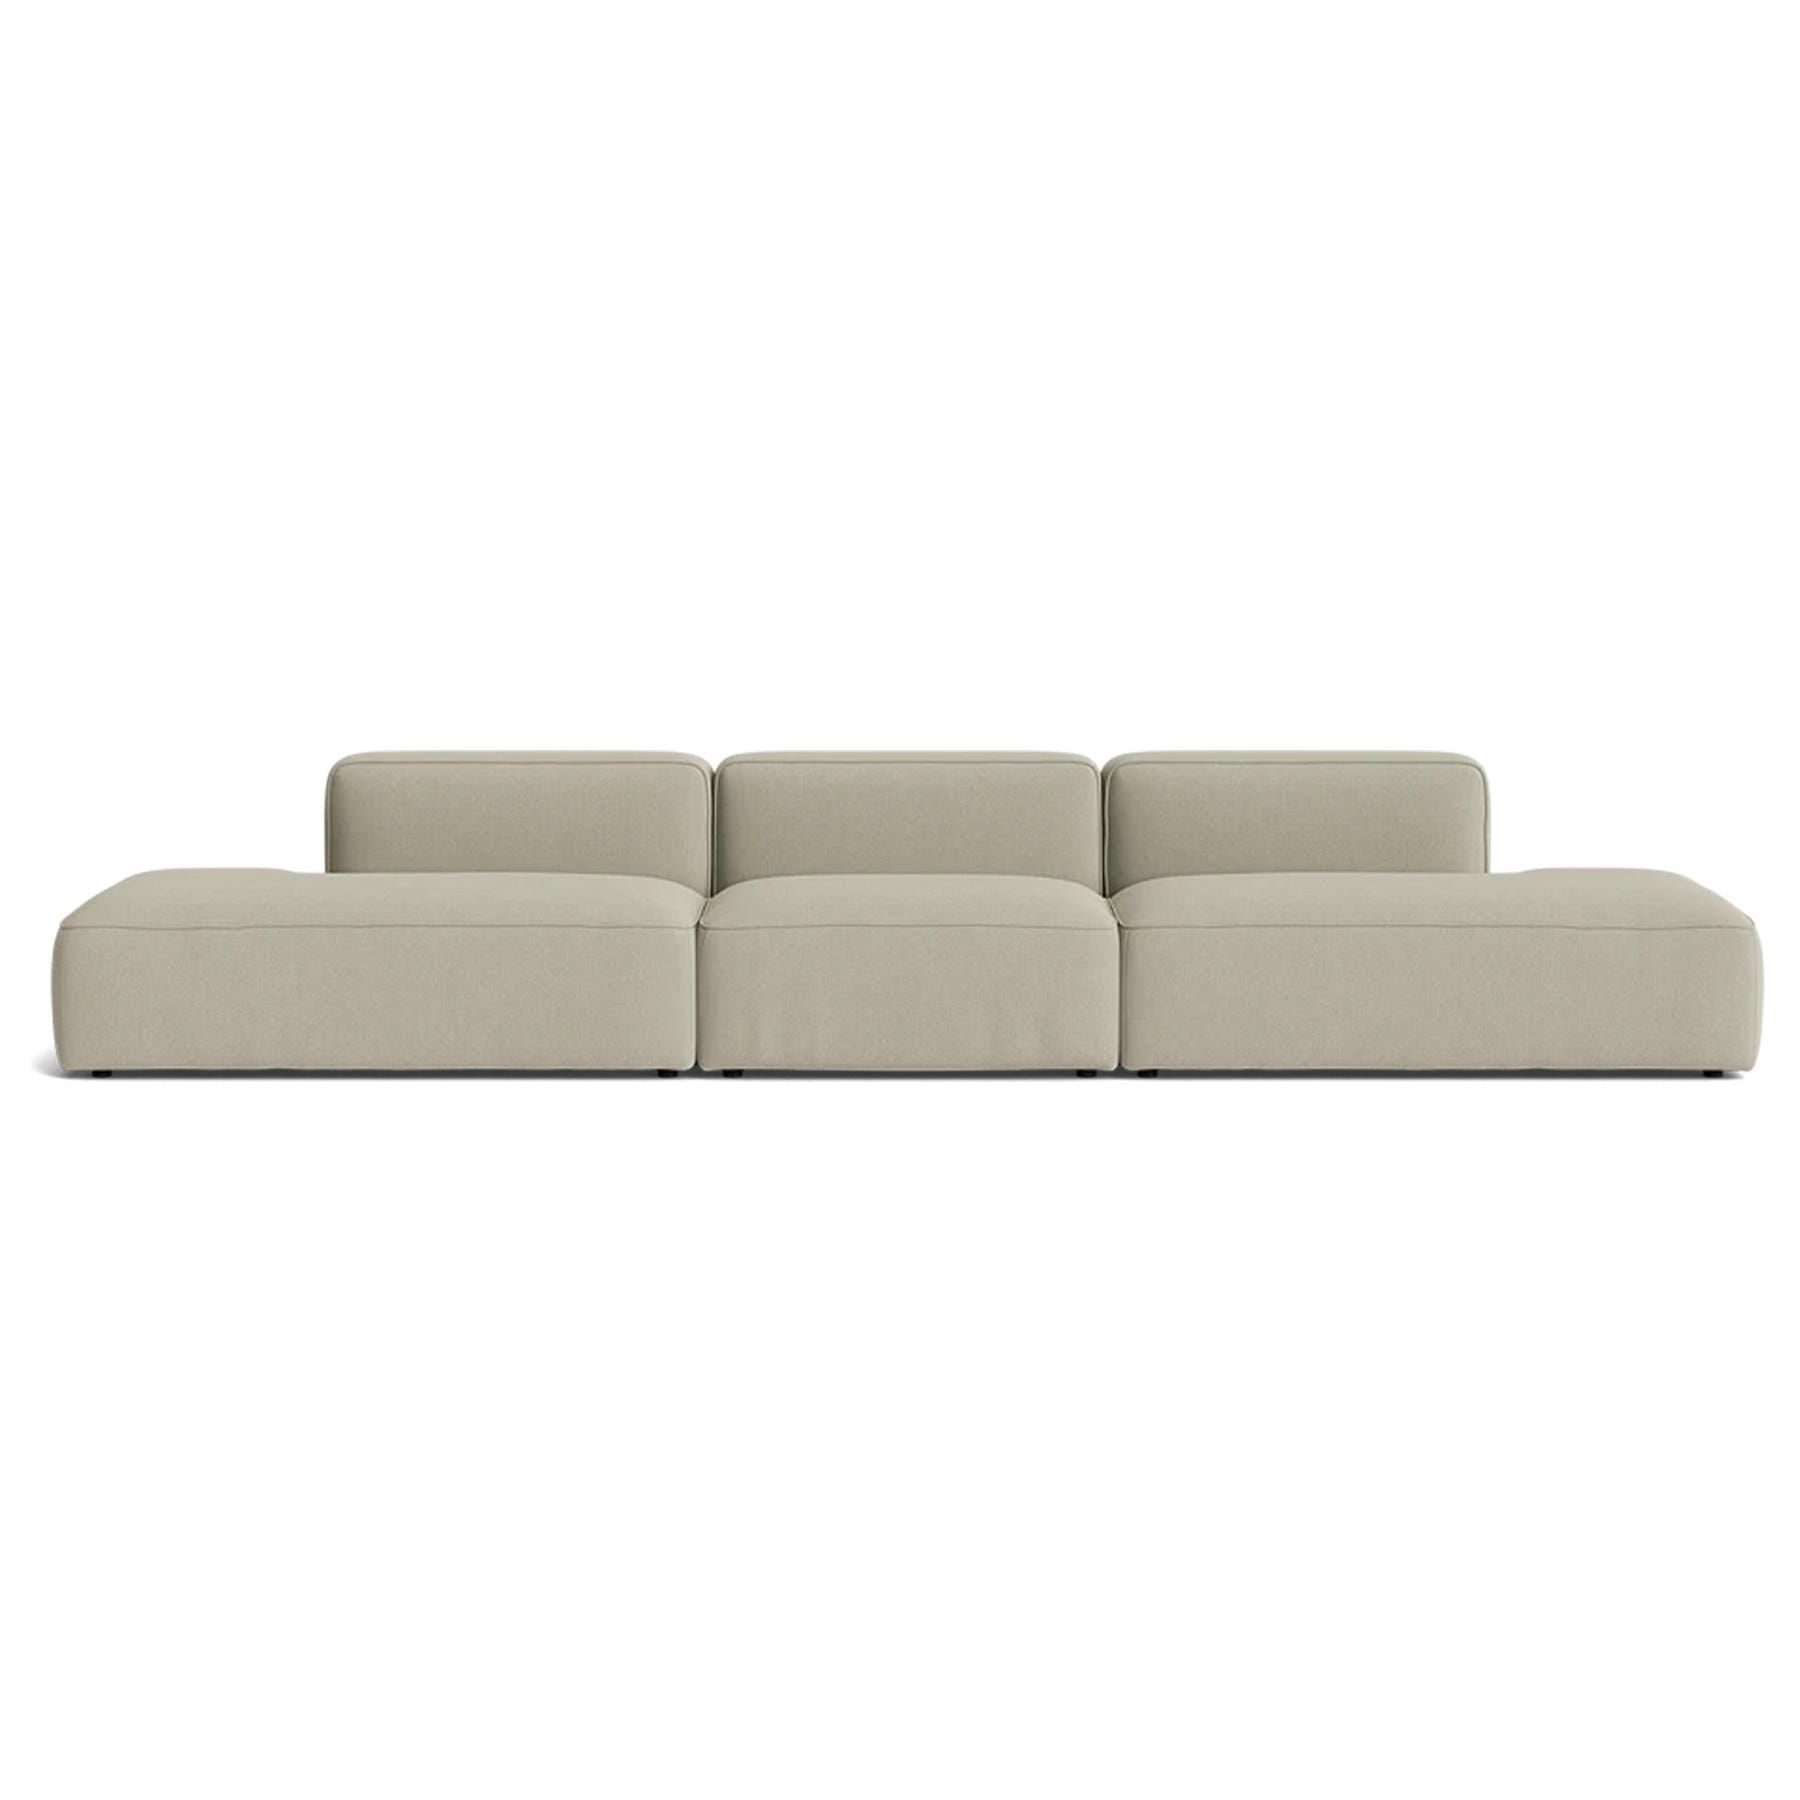 Make Nordic Basecamp Xl Midt Open Sofa Fiord 322 Brown Designer Furniture From Holloways Of Ludlow